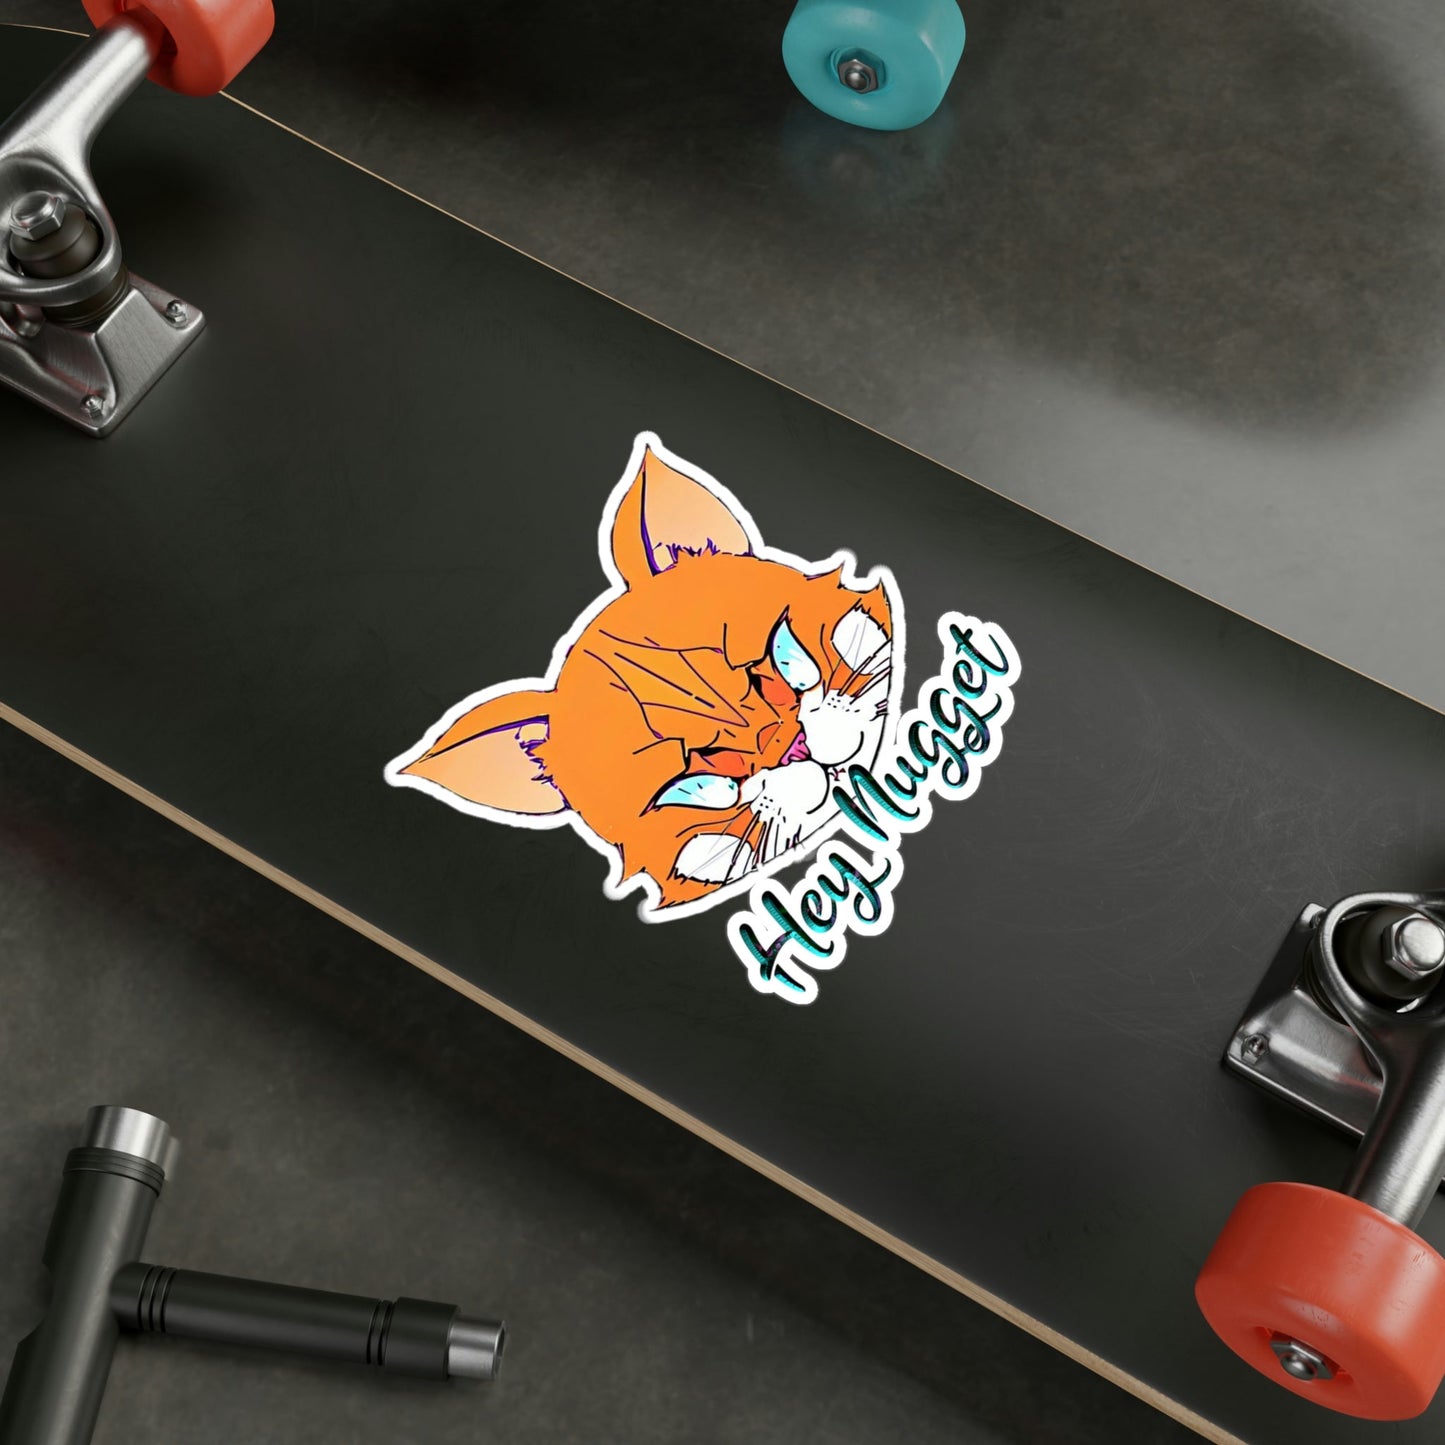 Stand out  with the  Vinyl Decals  available at Hey Nugget. Grab yours today!